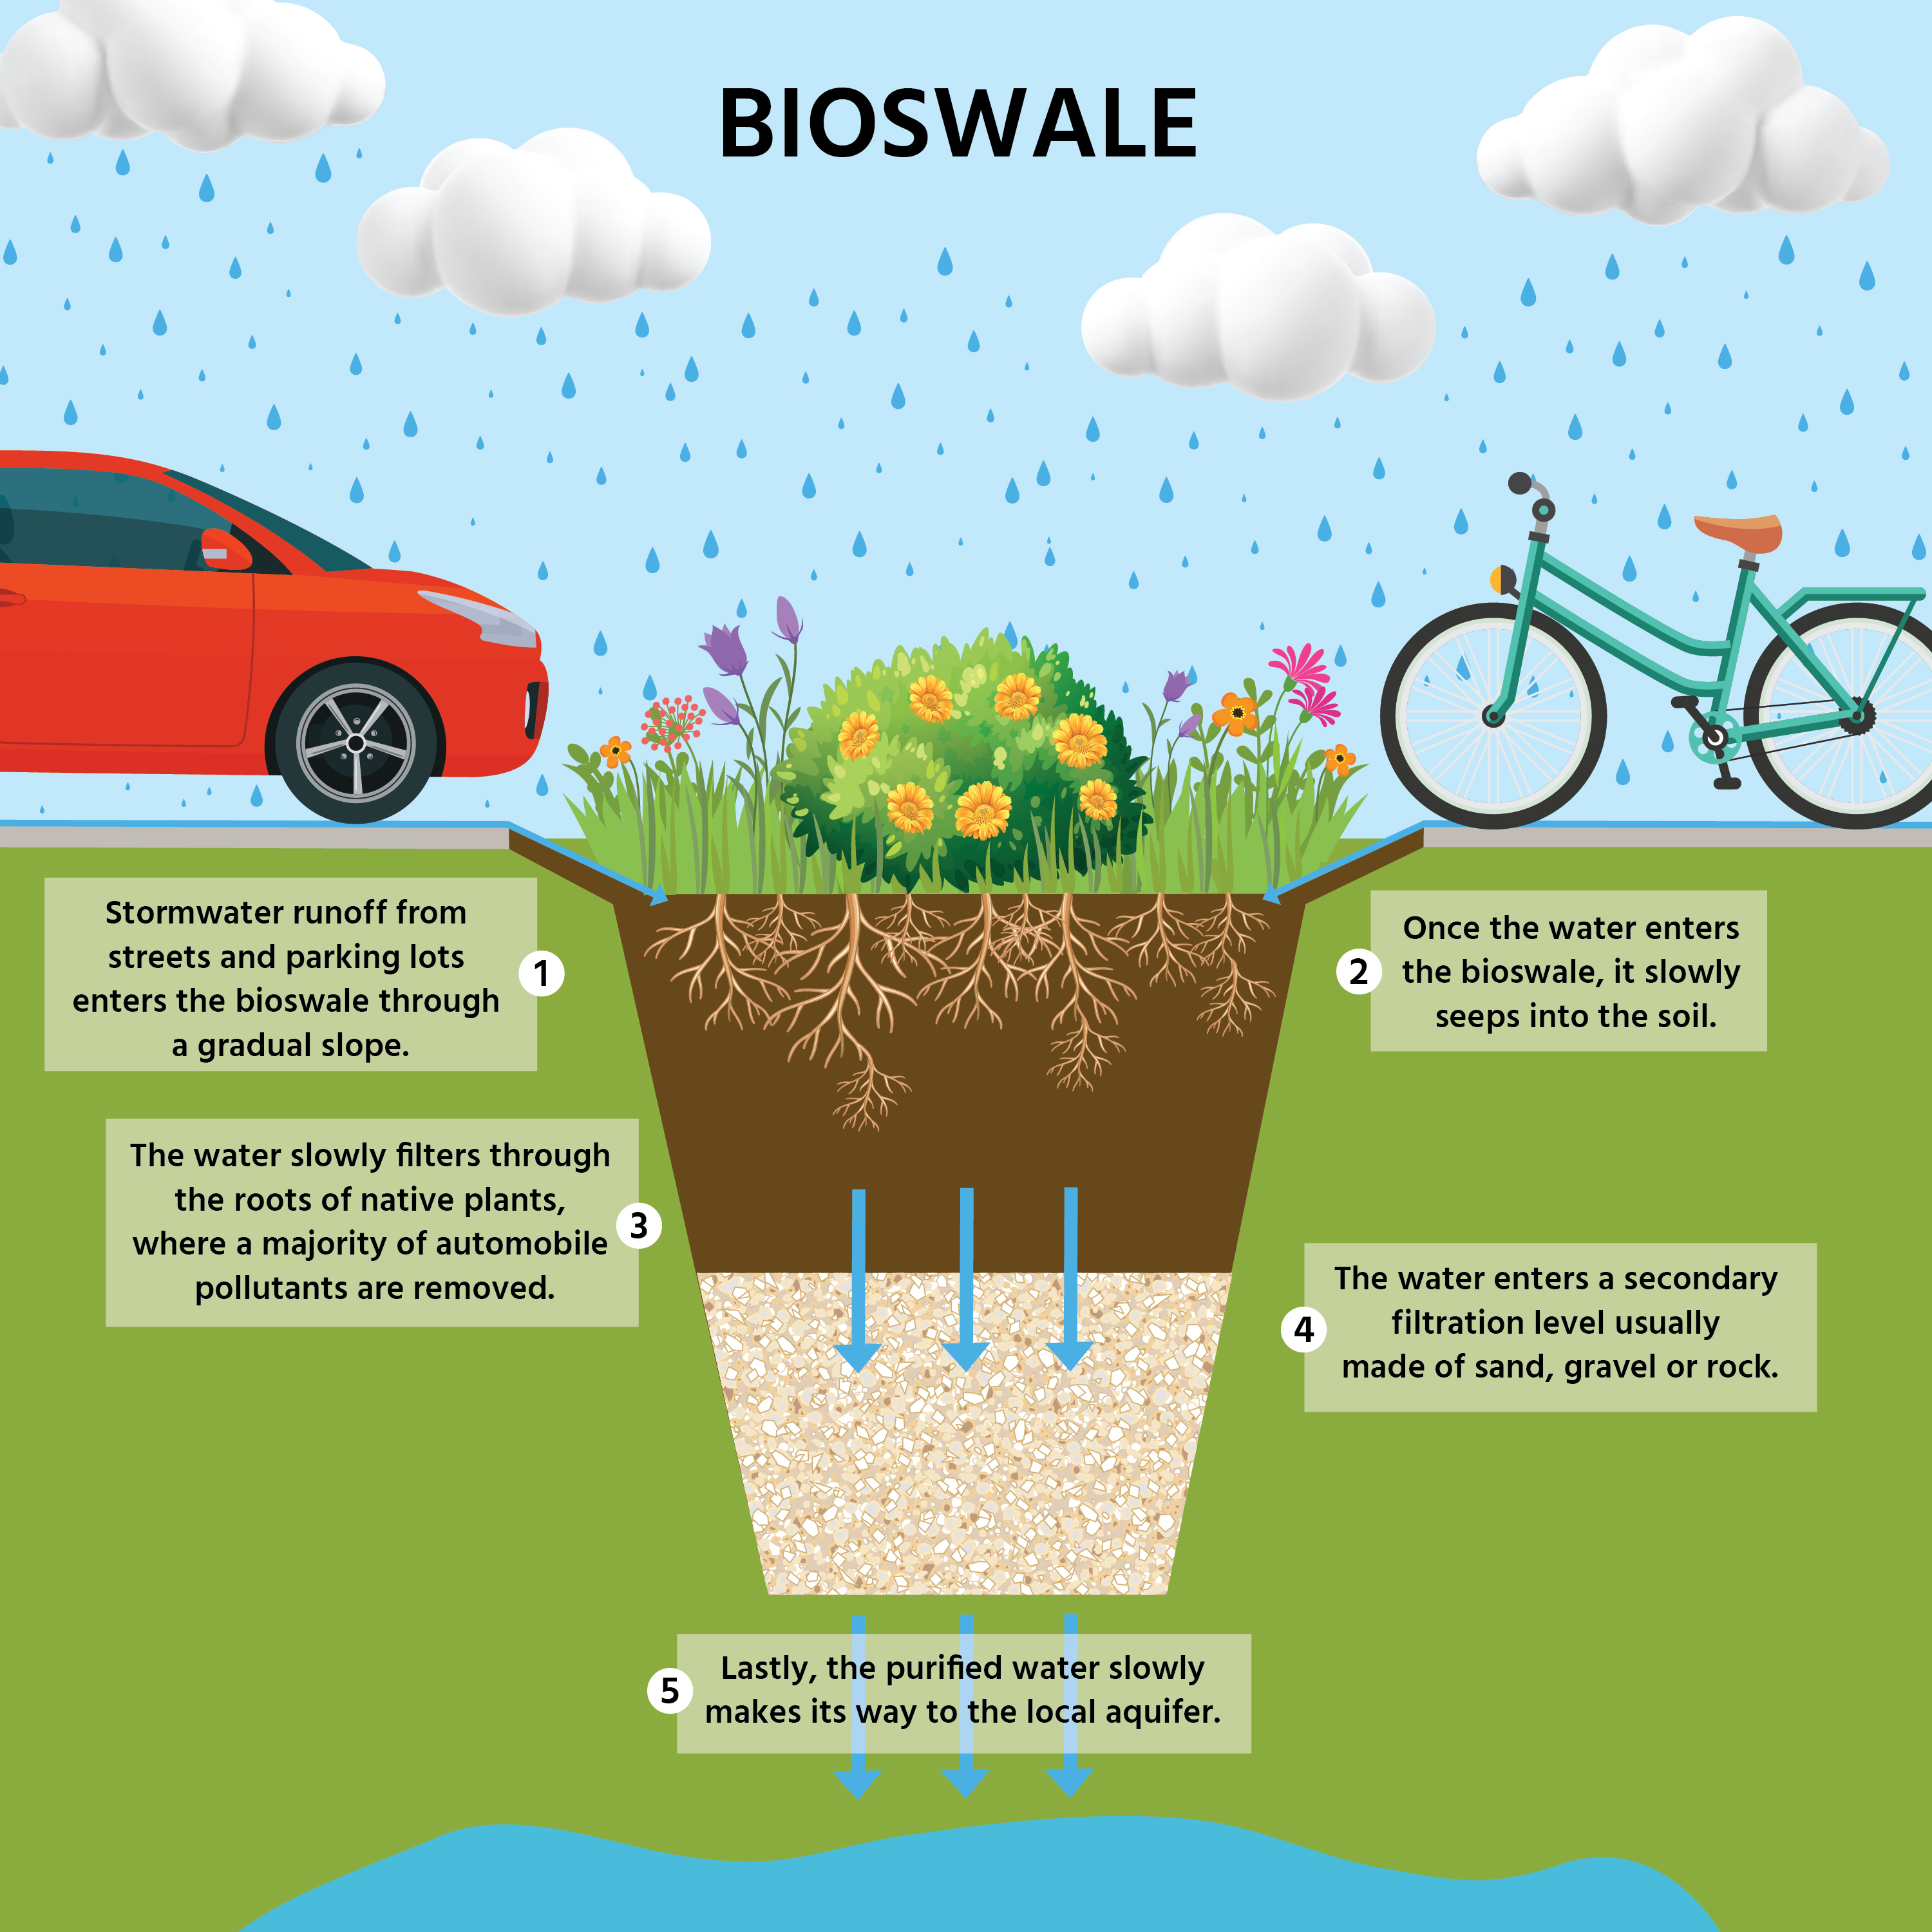 Educational illustration diagramming the impacts of a  bioswale